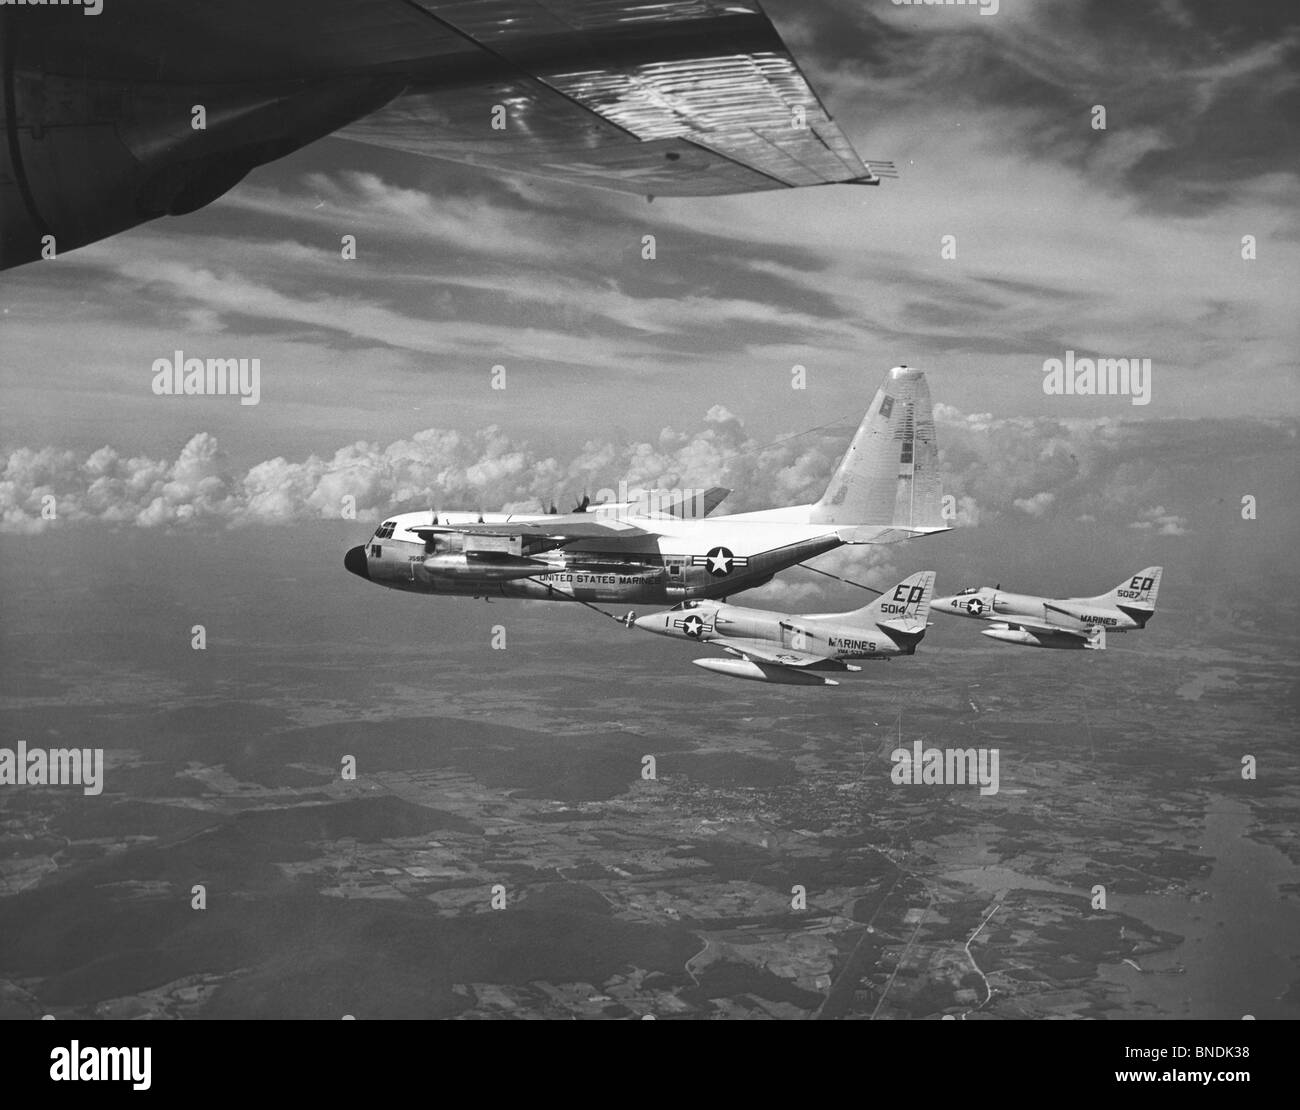 Military tanker airplane refueling a fighter plane in flight, 67T, Lockheed GV-1 Hercules, Refuel Tanker, US Marine Corps Stock Photo